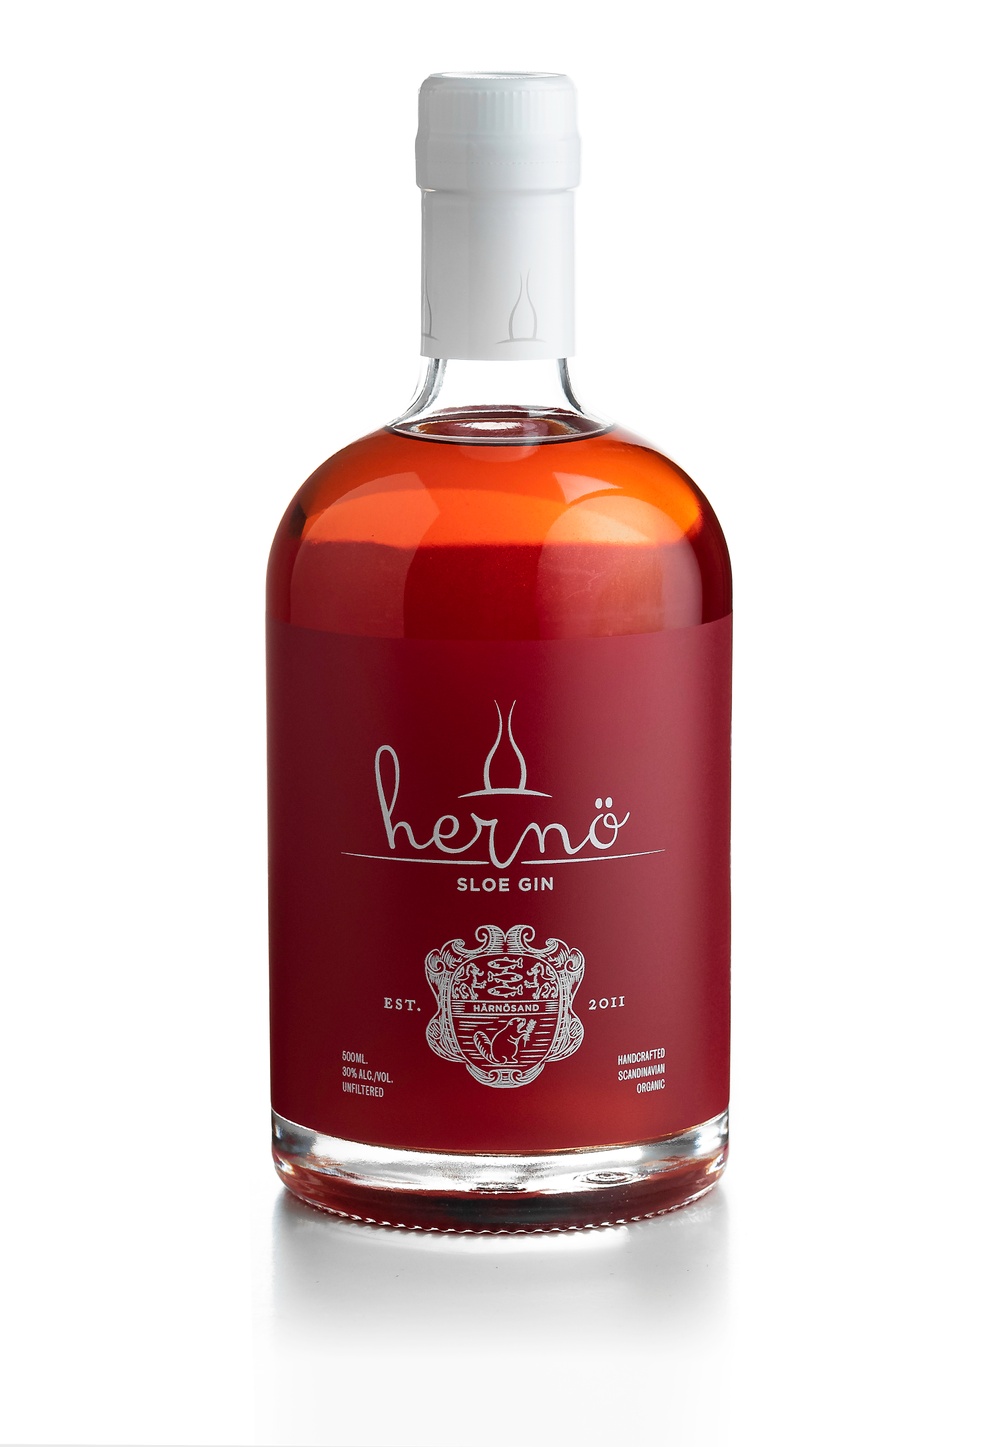 Hernö Sloe Gin is made from Hernö Gin and infused with organic sloe berries as a traditional Sloe Gin. A ruby red dream matured for three months together with ripe berries. Finally sweetened to achieve the perfect balance between the gentle dryness of the sloes and the floral freshness of Hernö Gin. Enjoyable on its own and goes very well in a Gin and Tonic.